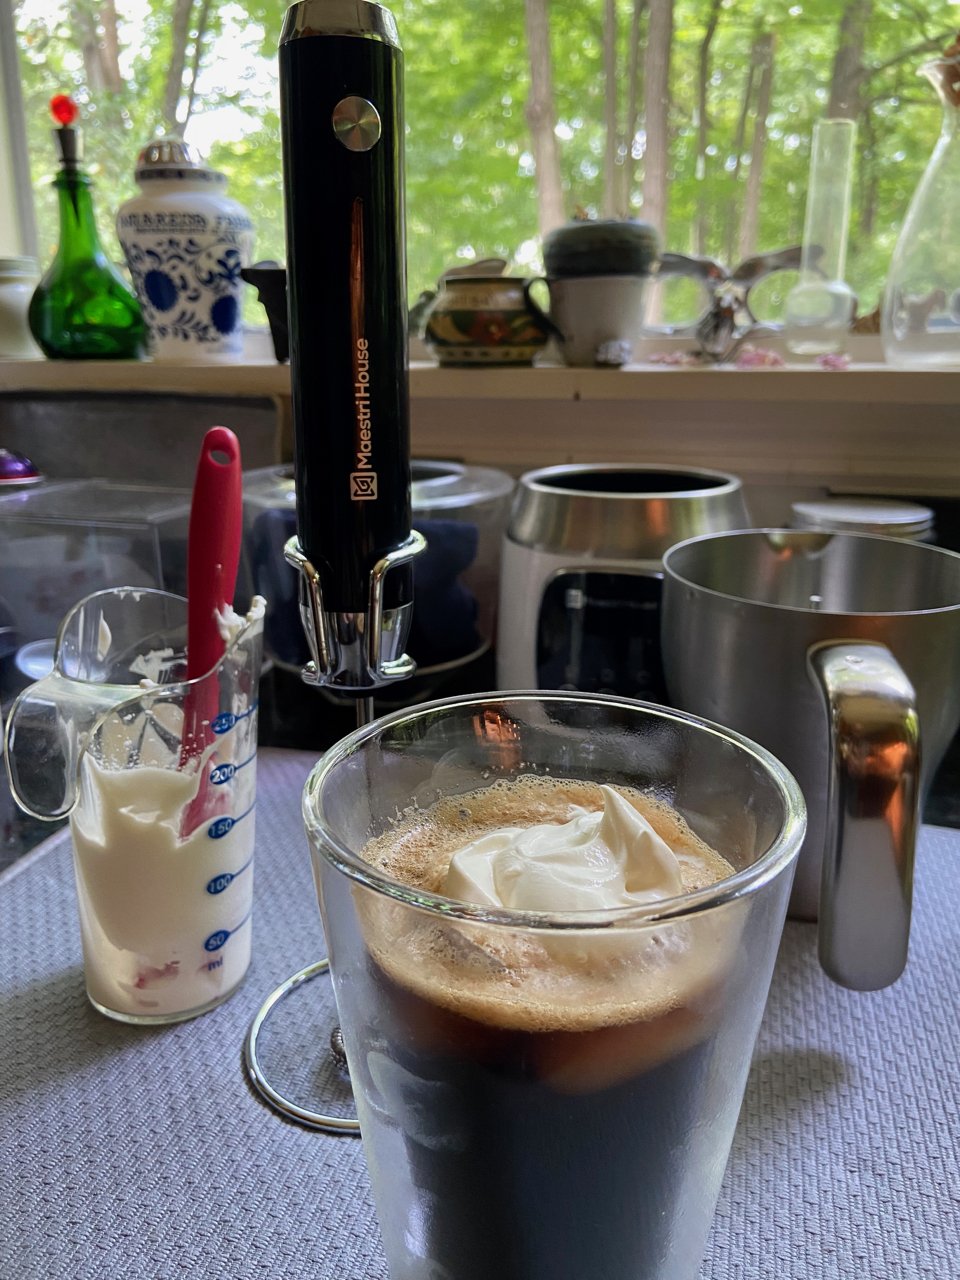 How to Make Whipped Cream With a Milk Frother